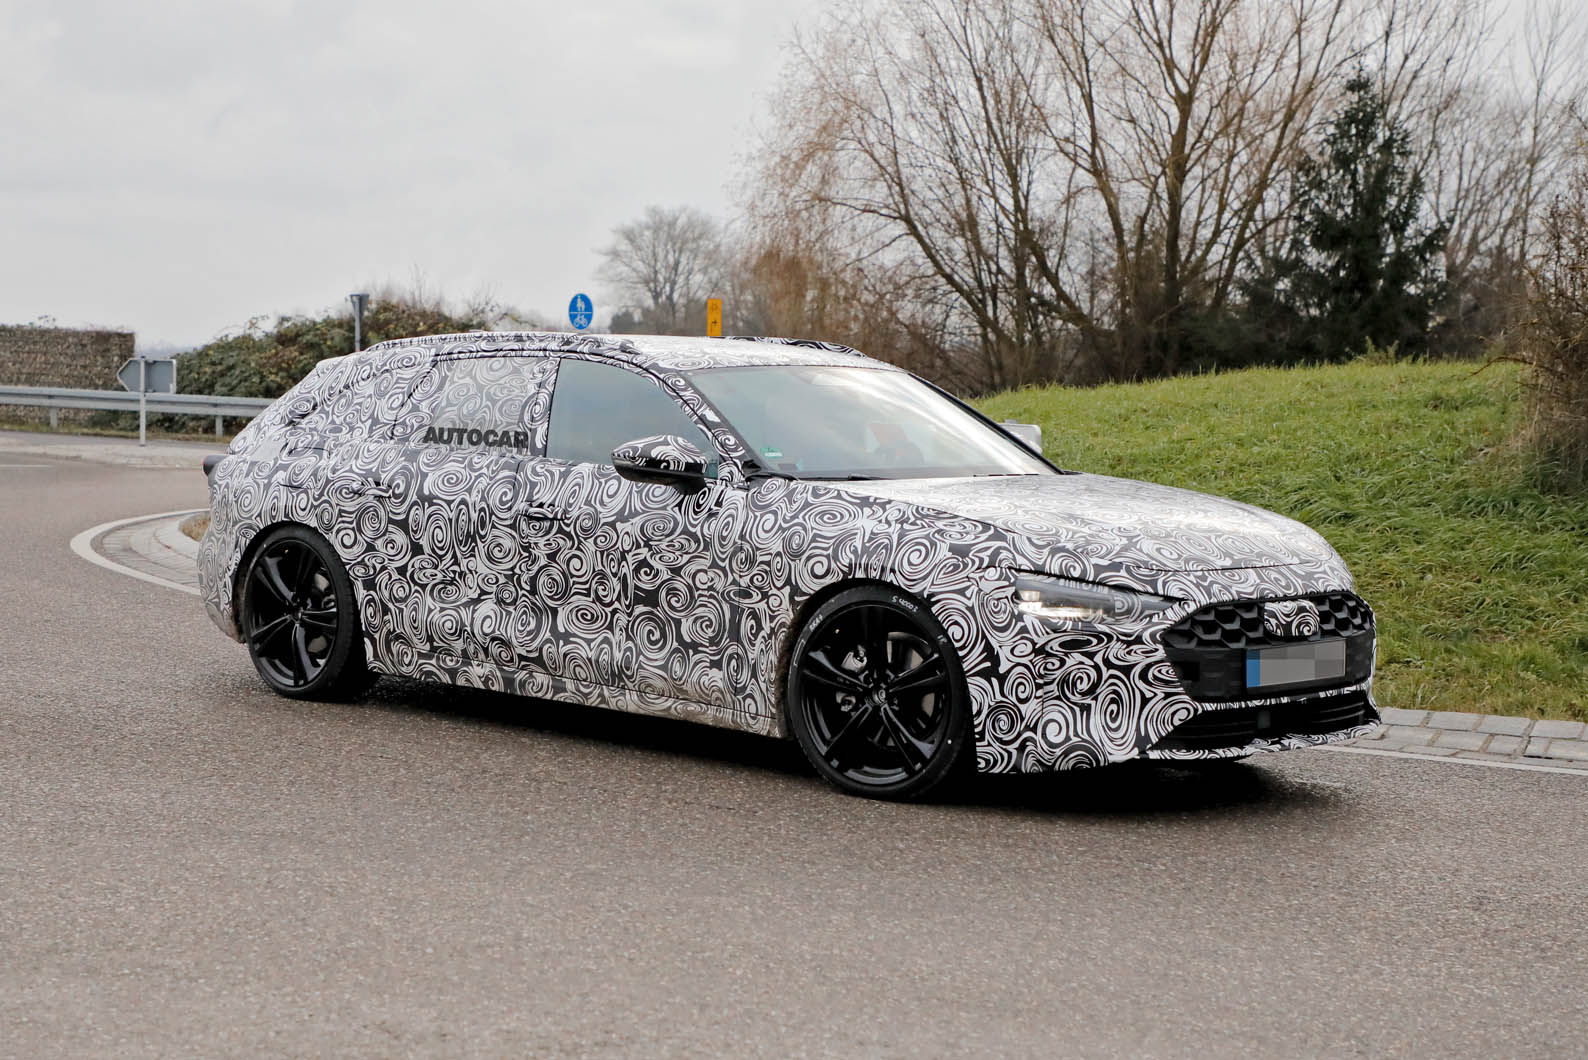 New 2023 Audi A4 Avant spotted as ...